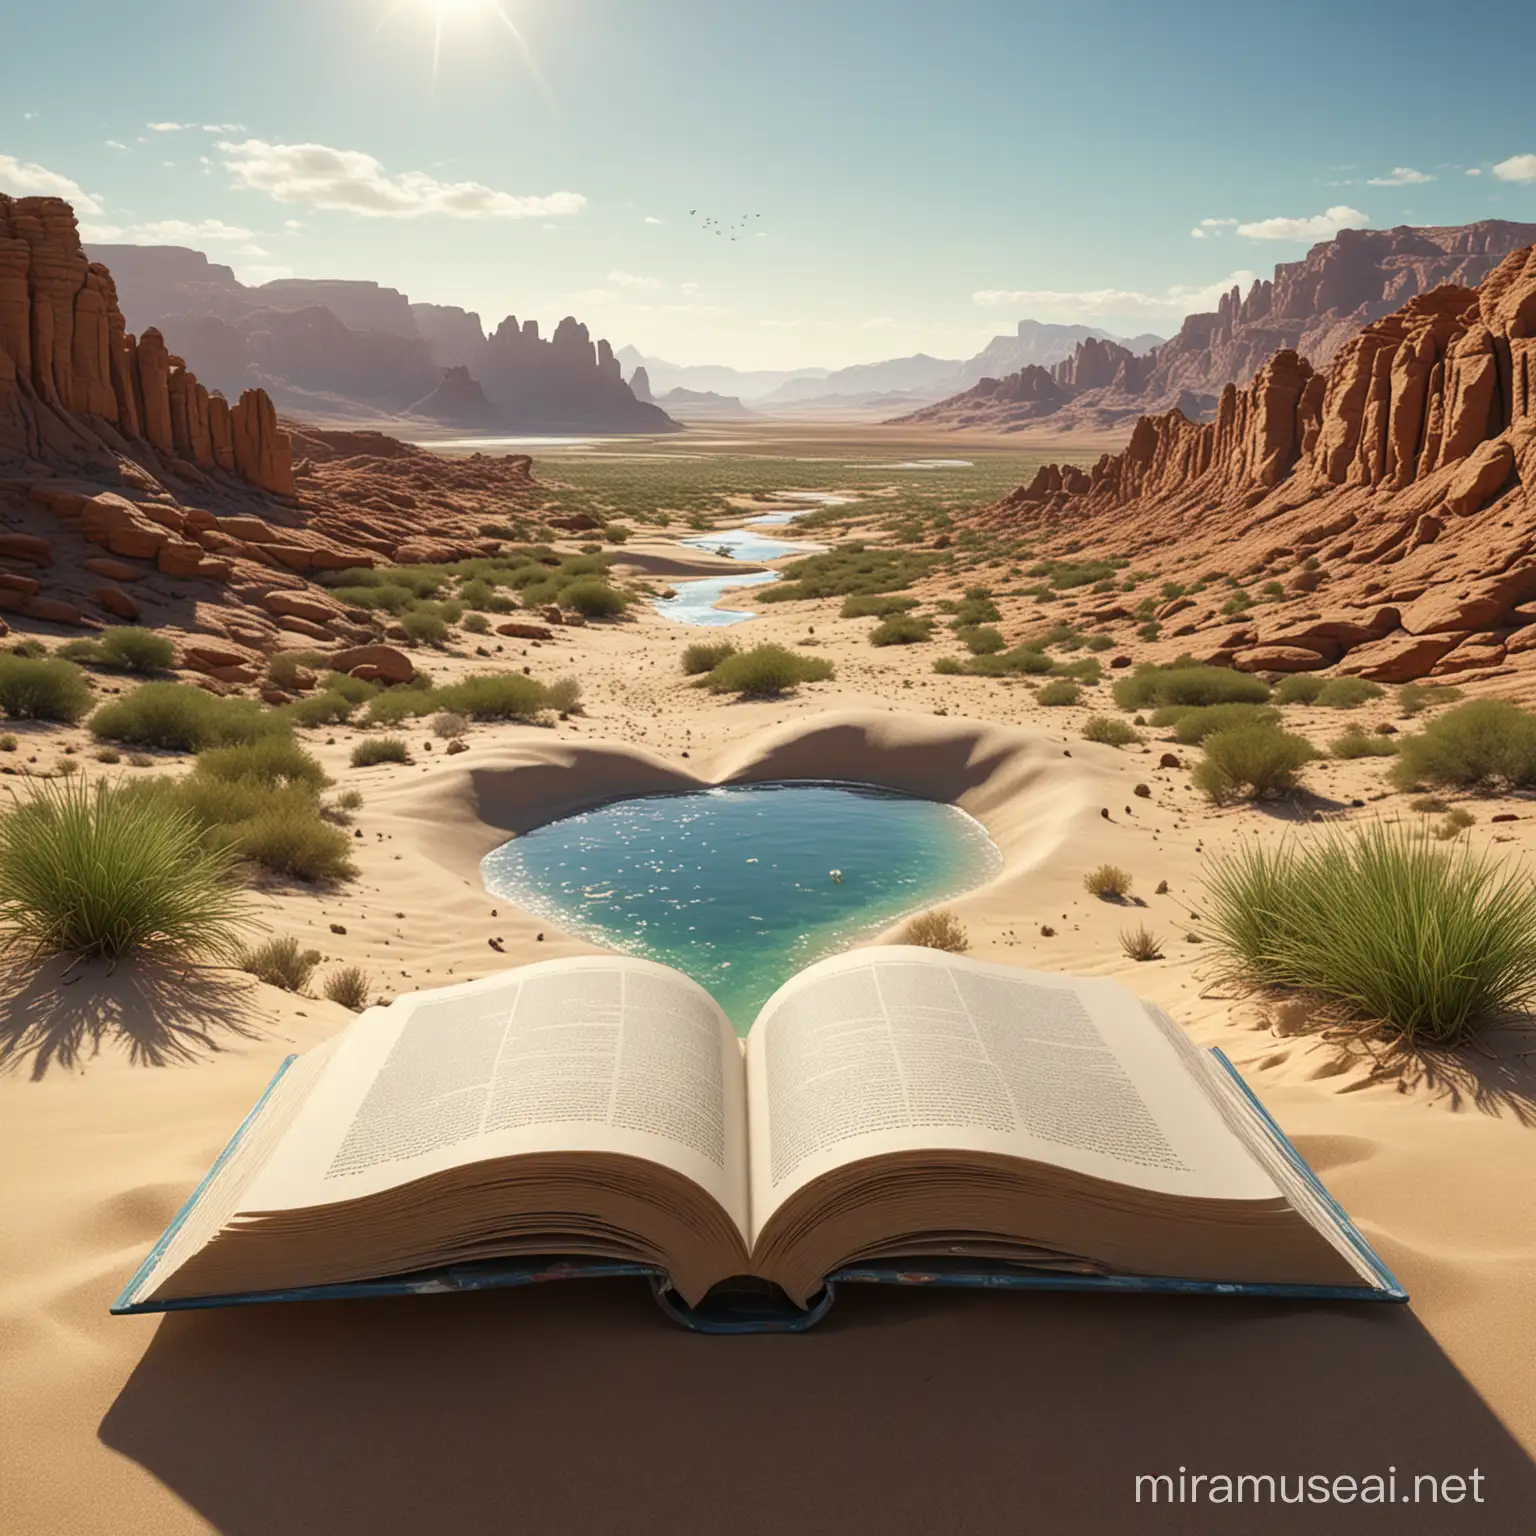 Create a hyper-realistic image of an open hardcover book set against a desert background. The pages of the book should appear to be magically transforming into a three-dimensional landscape. The heart-shaped inner contour of the pages reveals a serene oasis scene with a clear blue sky, an inviting lagoon at the center, surrounded by tall cliffs. The landscape flows seamlessly from the pages, with a mountain range in the distance under a tranquil sky. In the foreground, the oasis is lively with small signs of life, such as lush green grass patches and fish in the water. The book's pages are worn, suggesting age and wisdom. Shadows and highlights are well-defined, indicating a bright light source from the upper right, casting a gentle shadow of the book on the sand, 32k render, hyperrealistic, detailled.